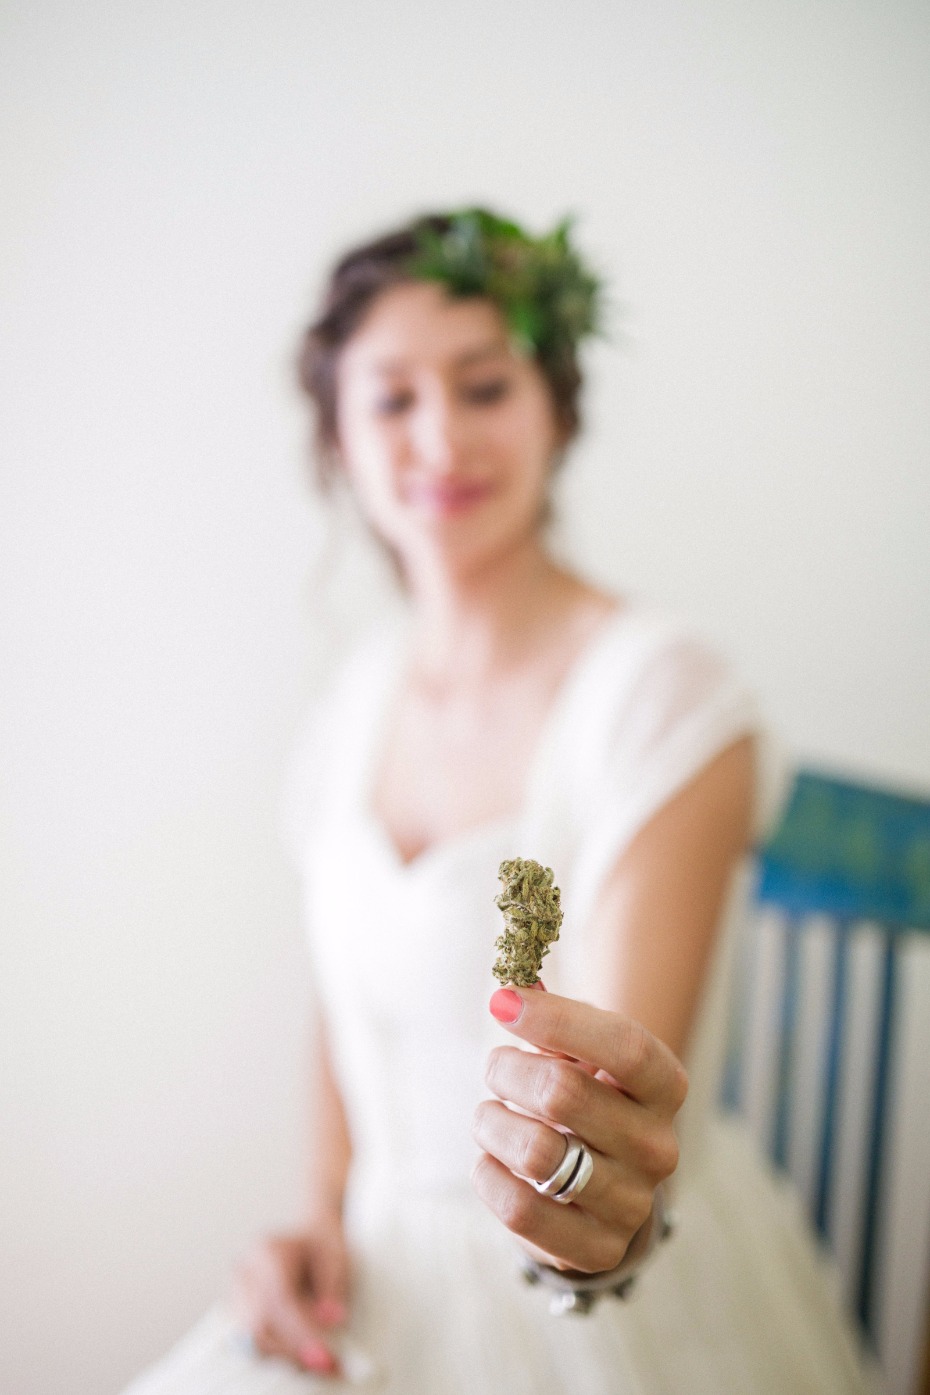 The cannabis bride and her little bud